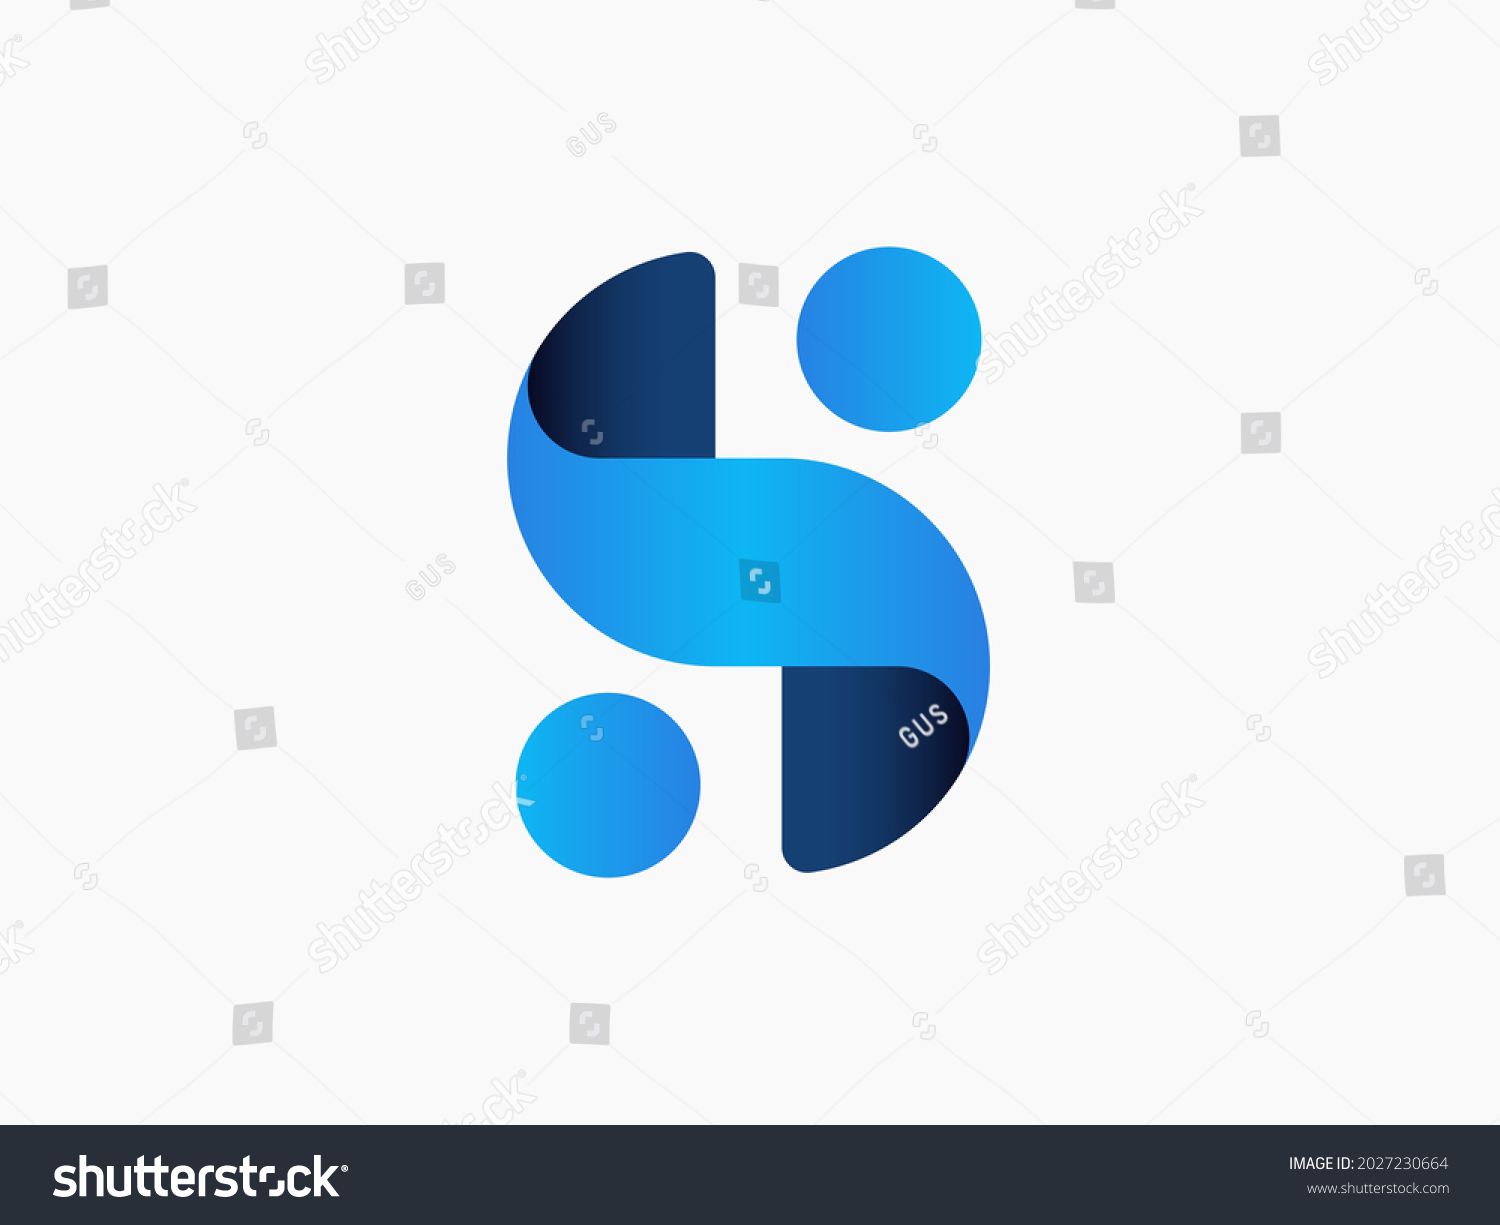 SVG of S geometric logo composed of circles and simple curves. With fresh gradient colors, it looks modern and techy. The sophisticated looking S logo is perfect for any company logo. svg